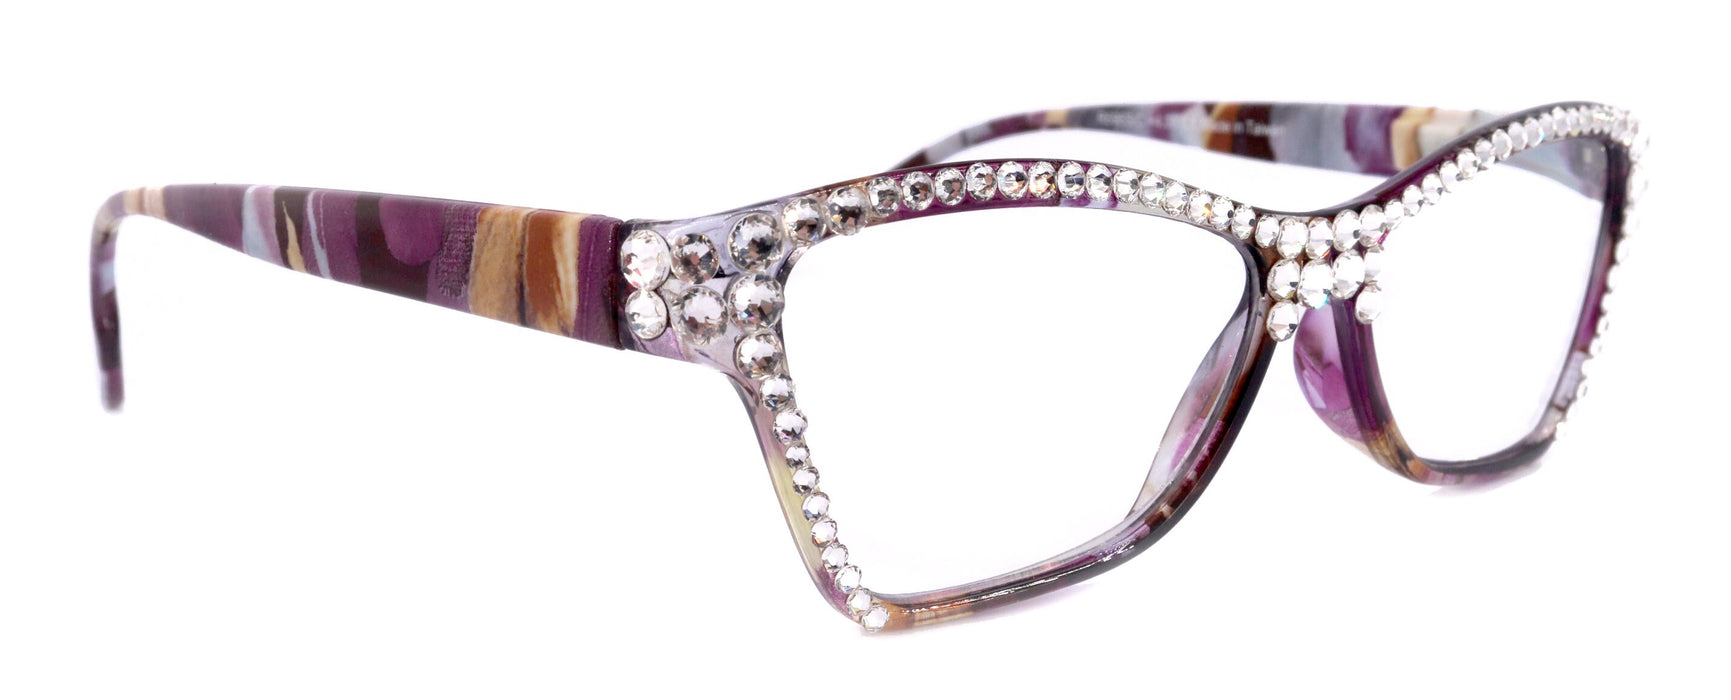 Avian, (Bling) Women Reading Glasses w (Full TOP) (Clear) Genuine European Crystals, Magnifying, Cat Eye (Purple, Blue) NY Fifth Avenue.